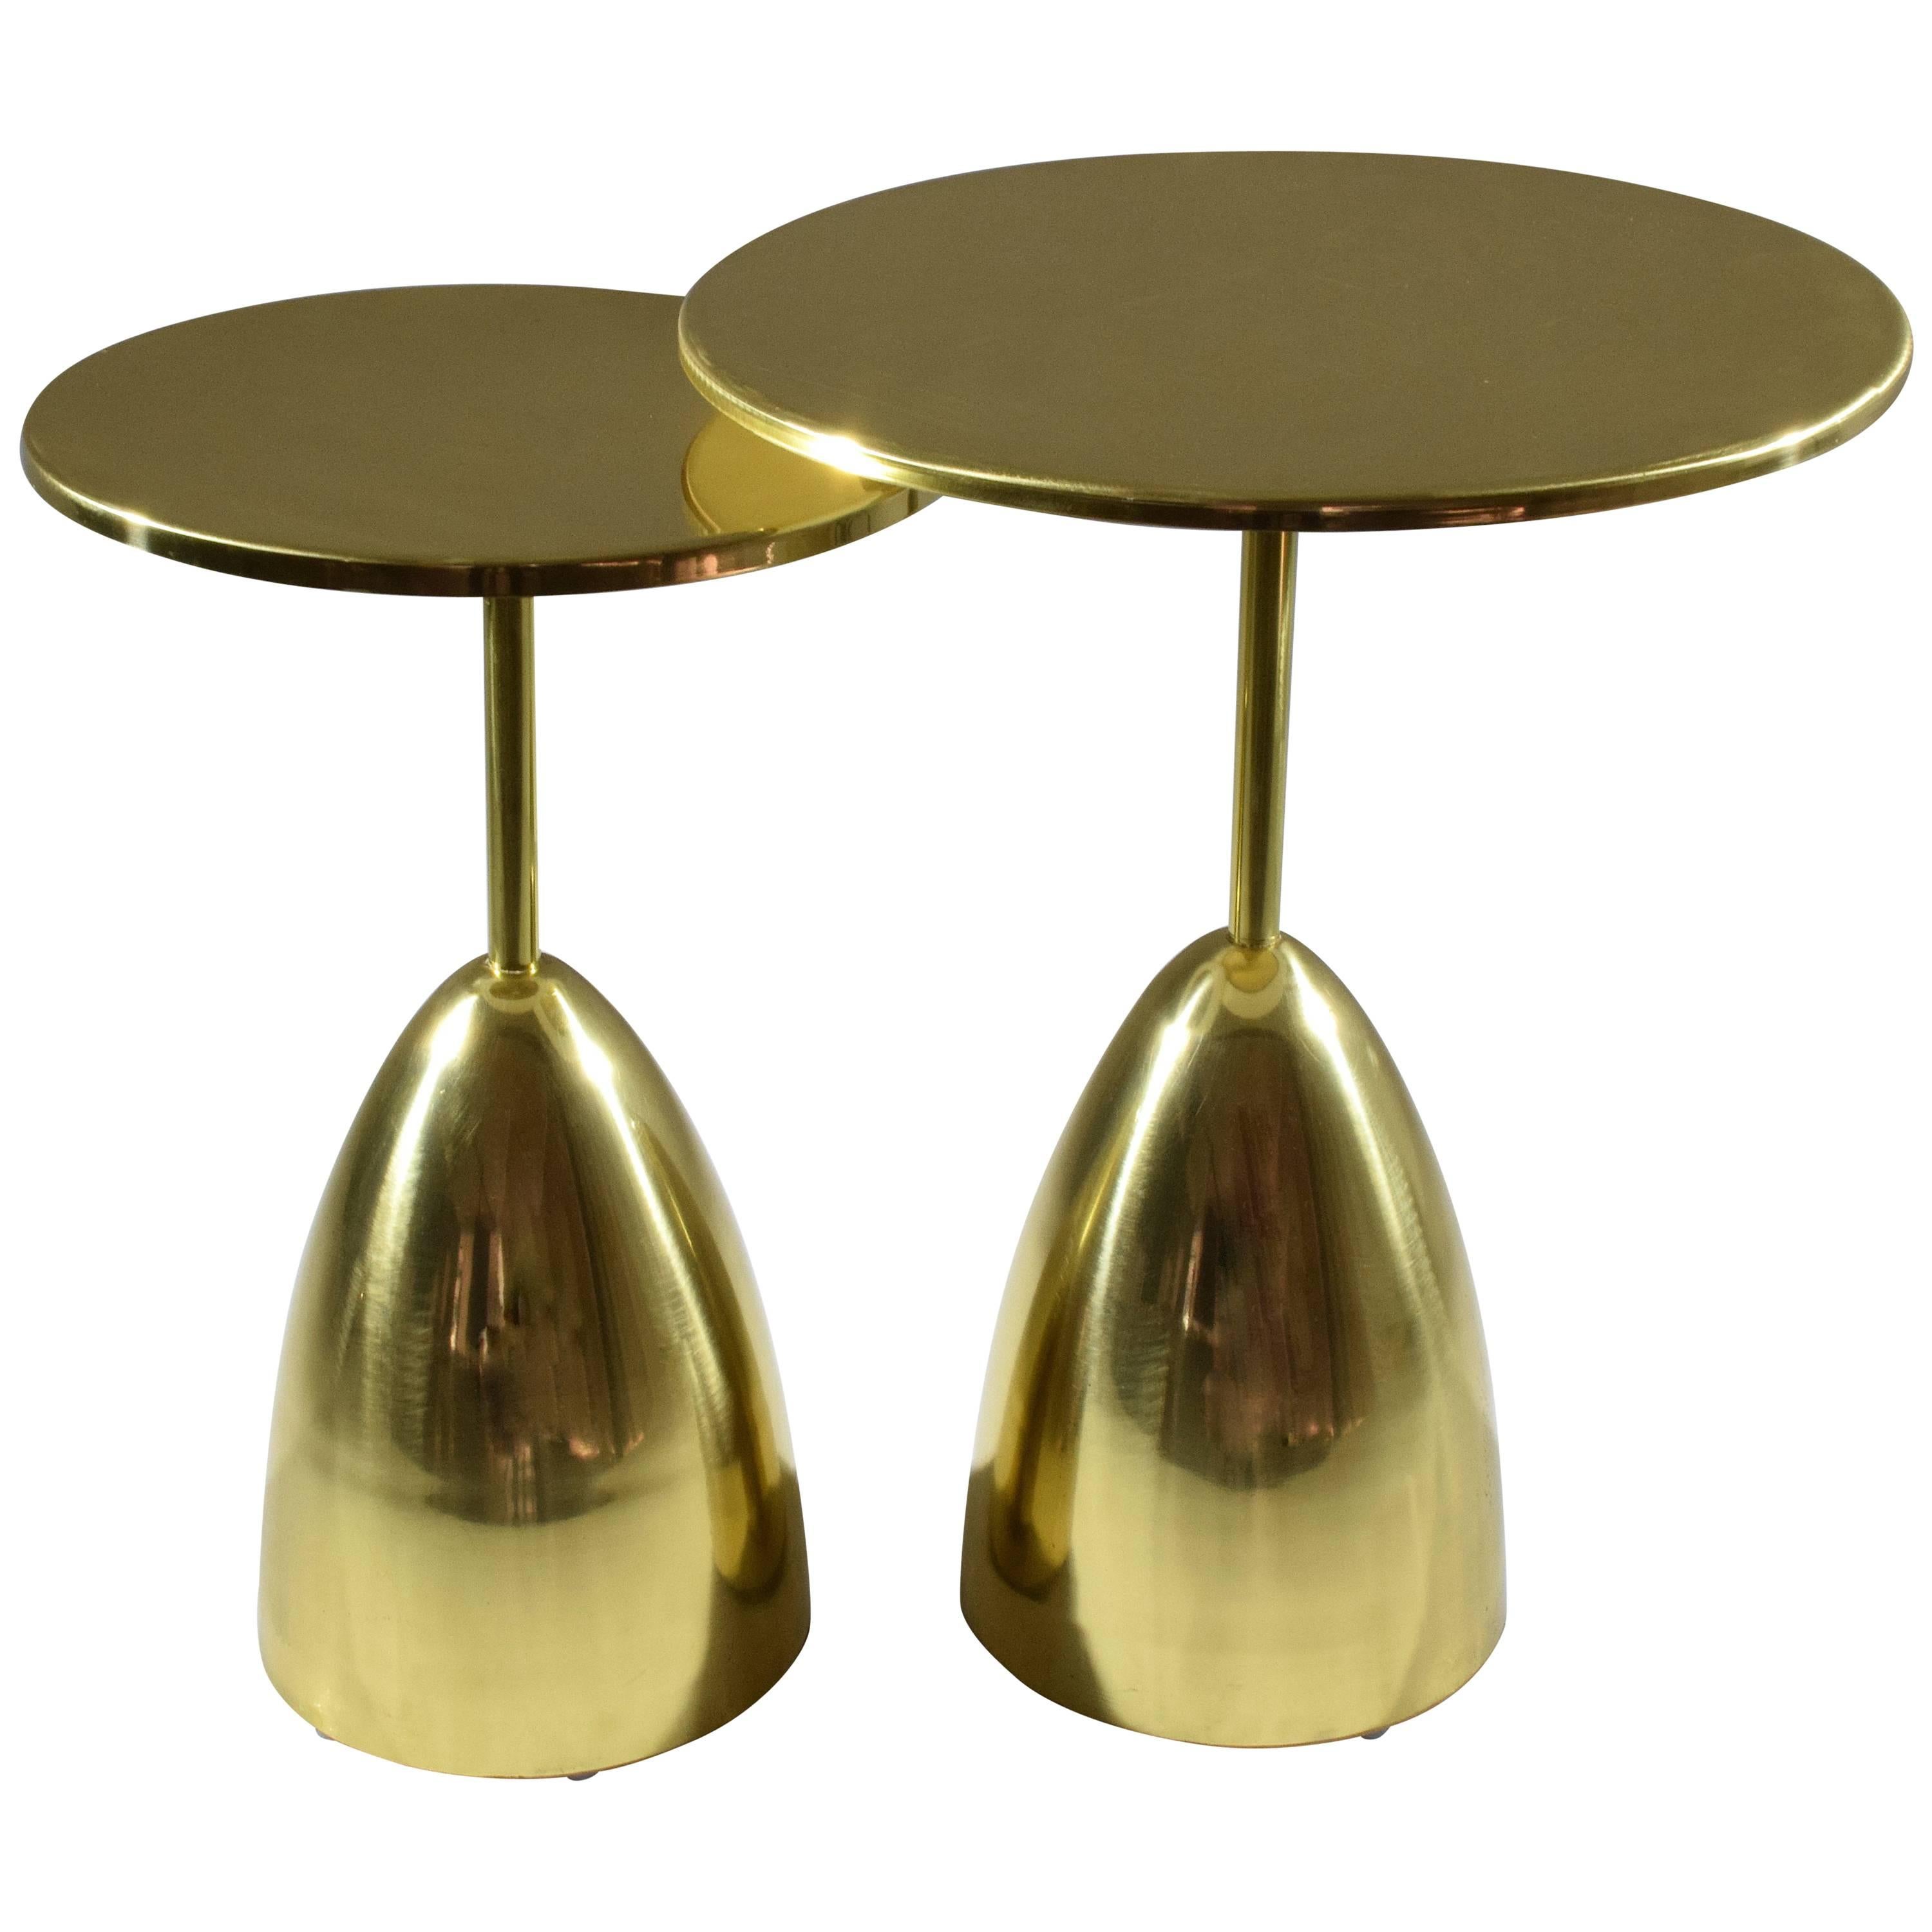 Indulge in the ultimate in artisanal luxury with this set of two handcrafted guéridon nesting side or end tables. Made with the utmost care and attention to detail, each table is crafted from the finest brass material and created using traditional